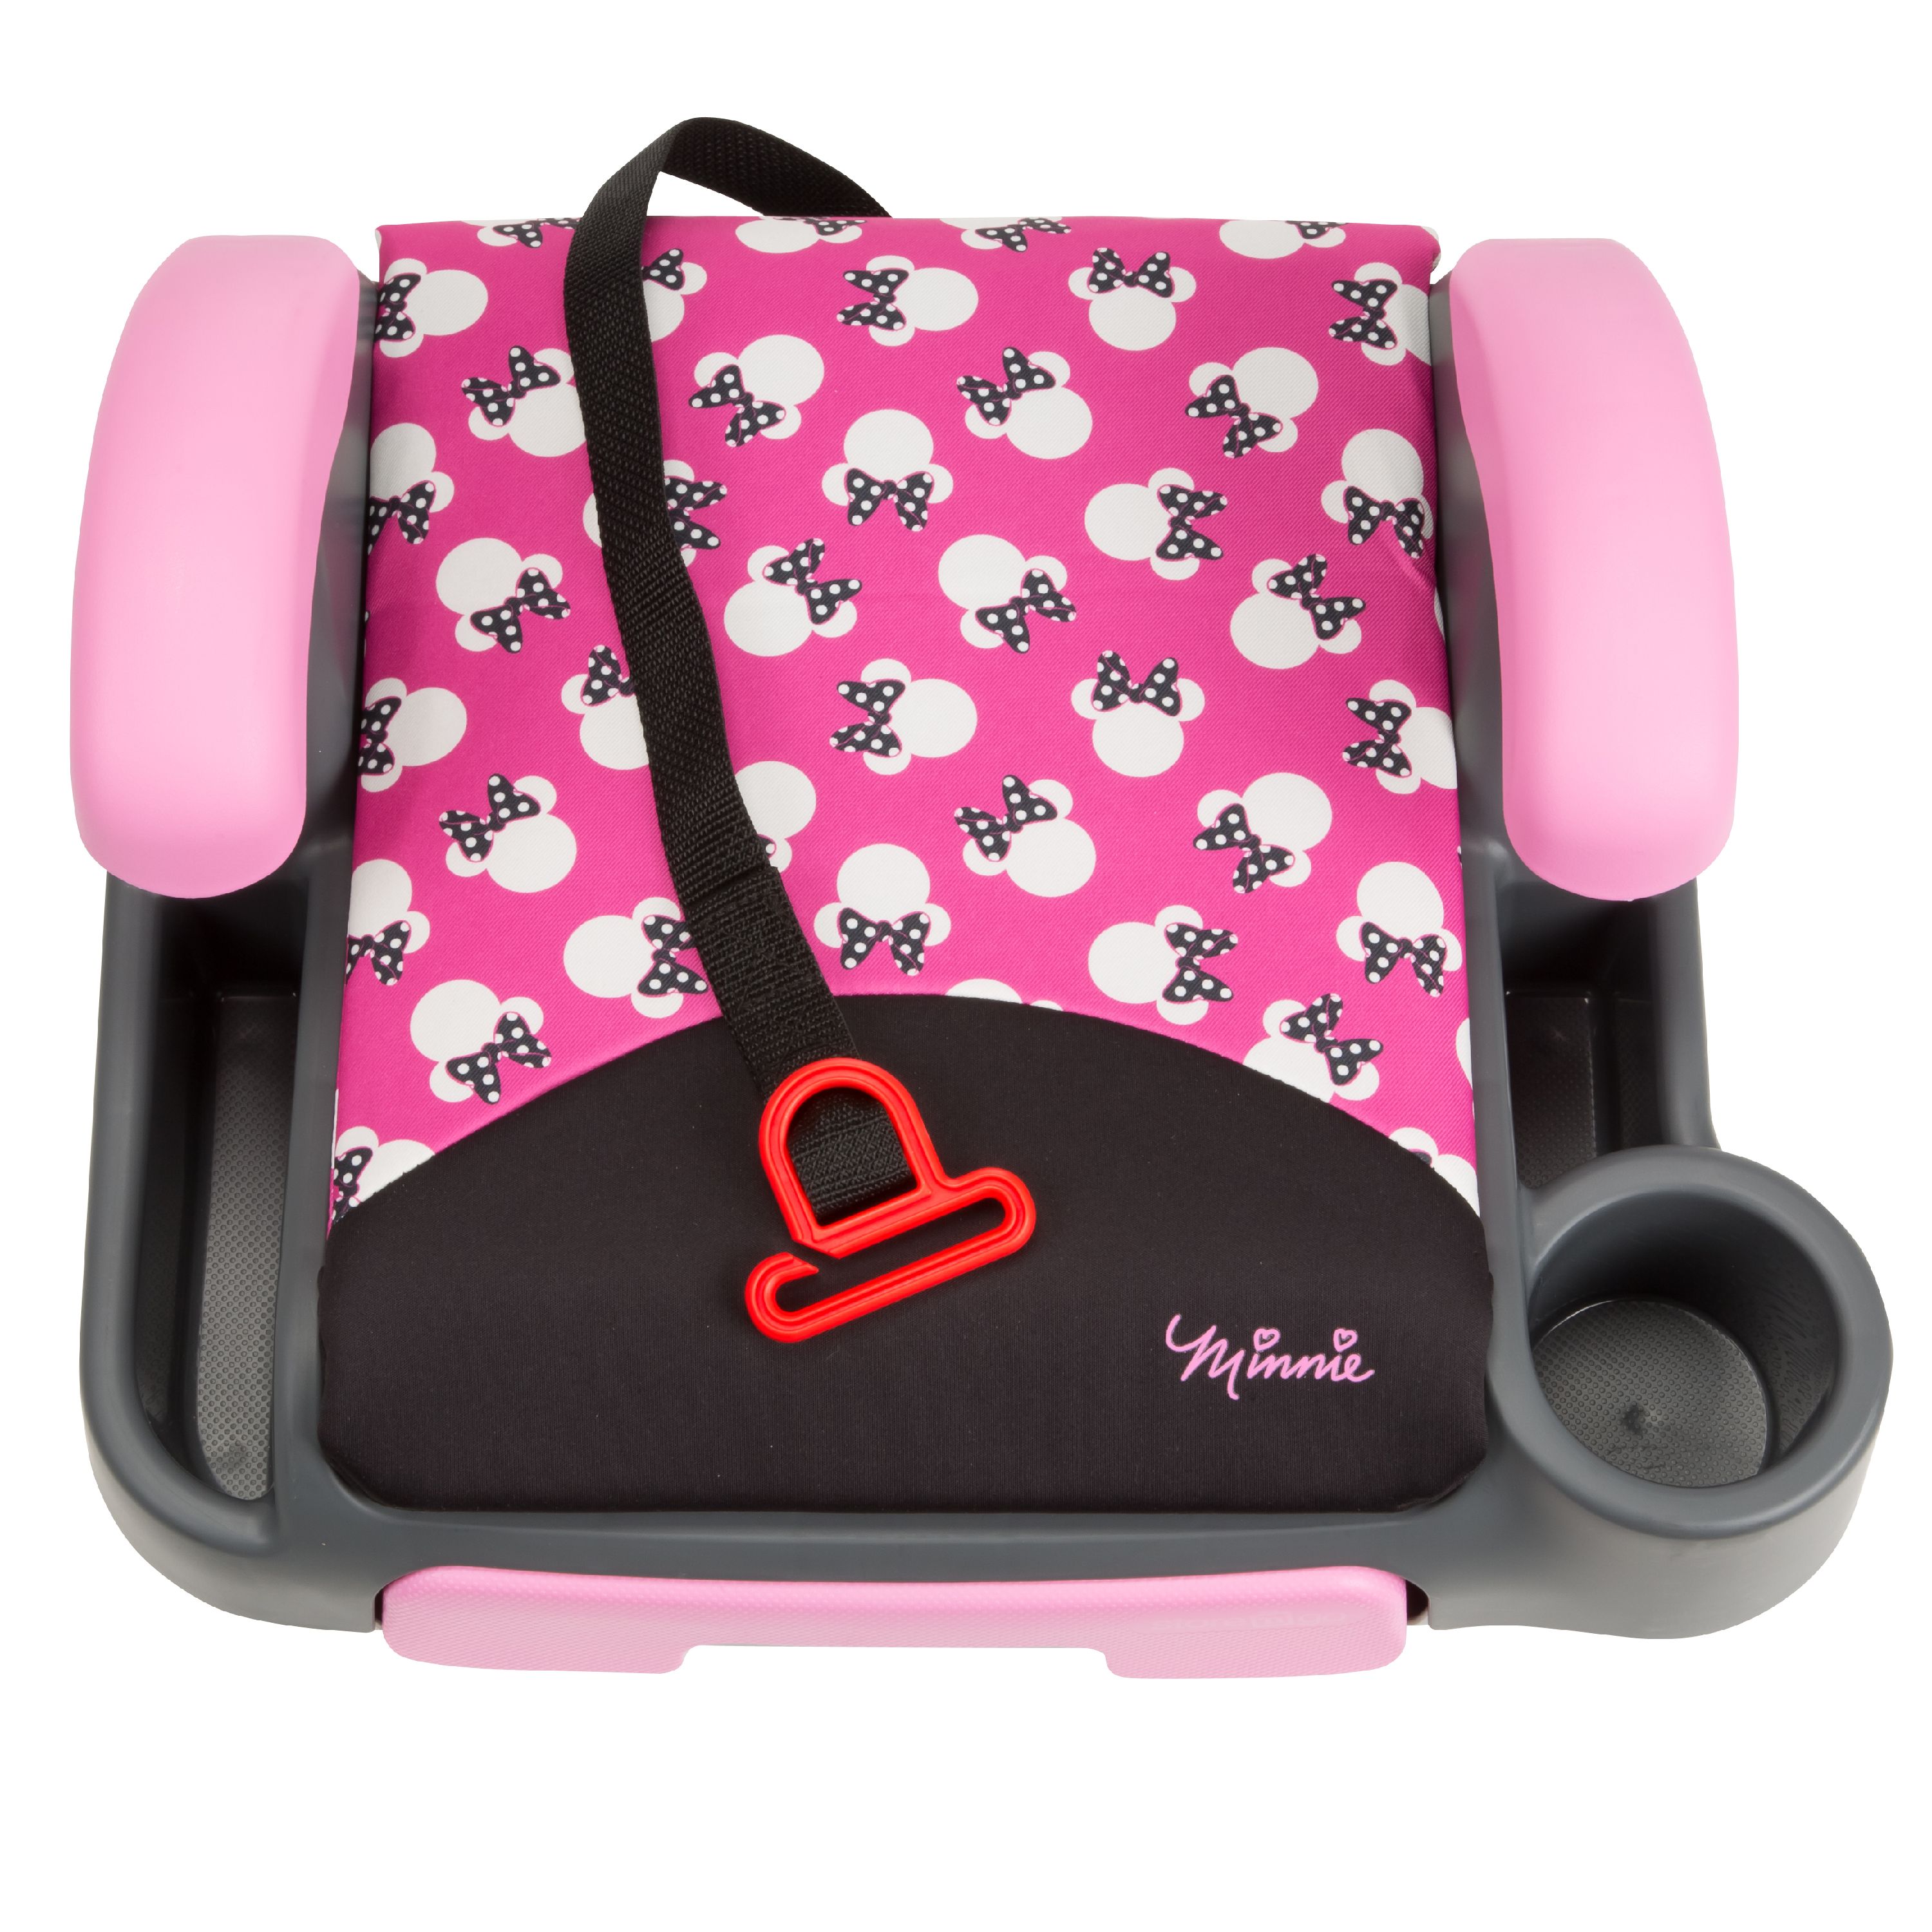 Disney Store 'n Go Backless Booster Car Seat, Minnie Silhouette Pink - image 5 of 7